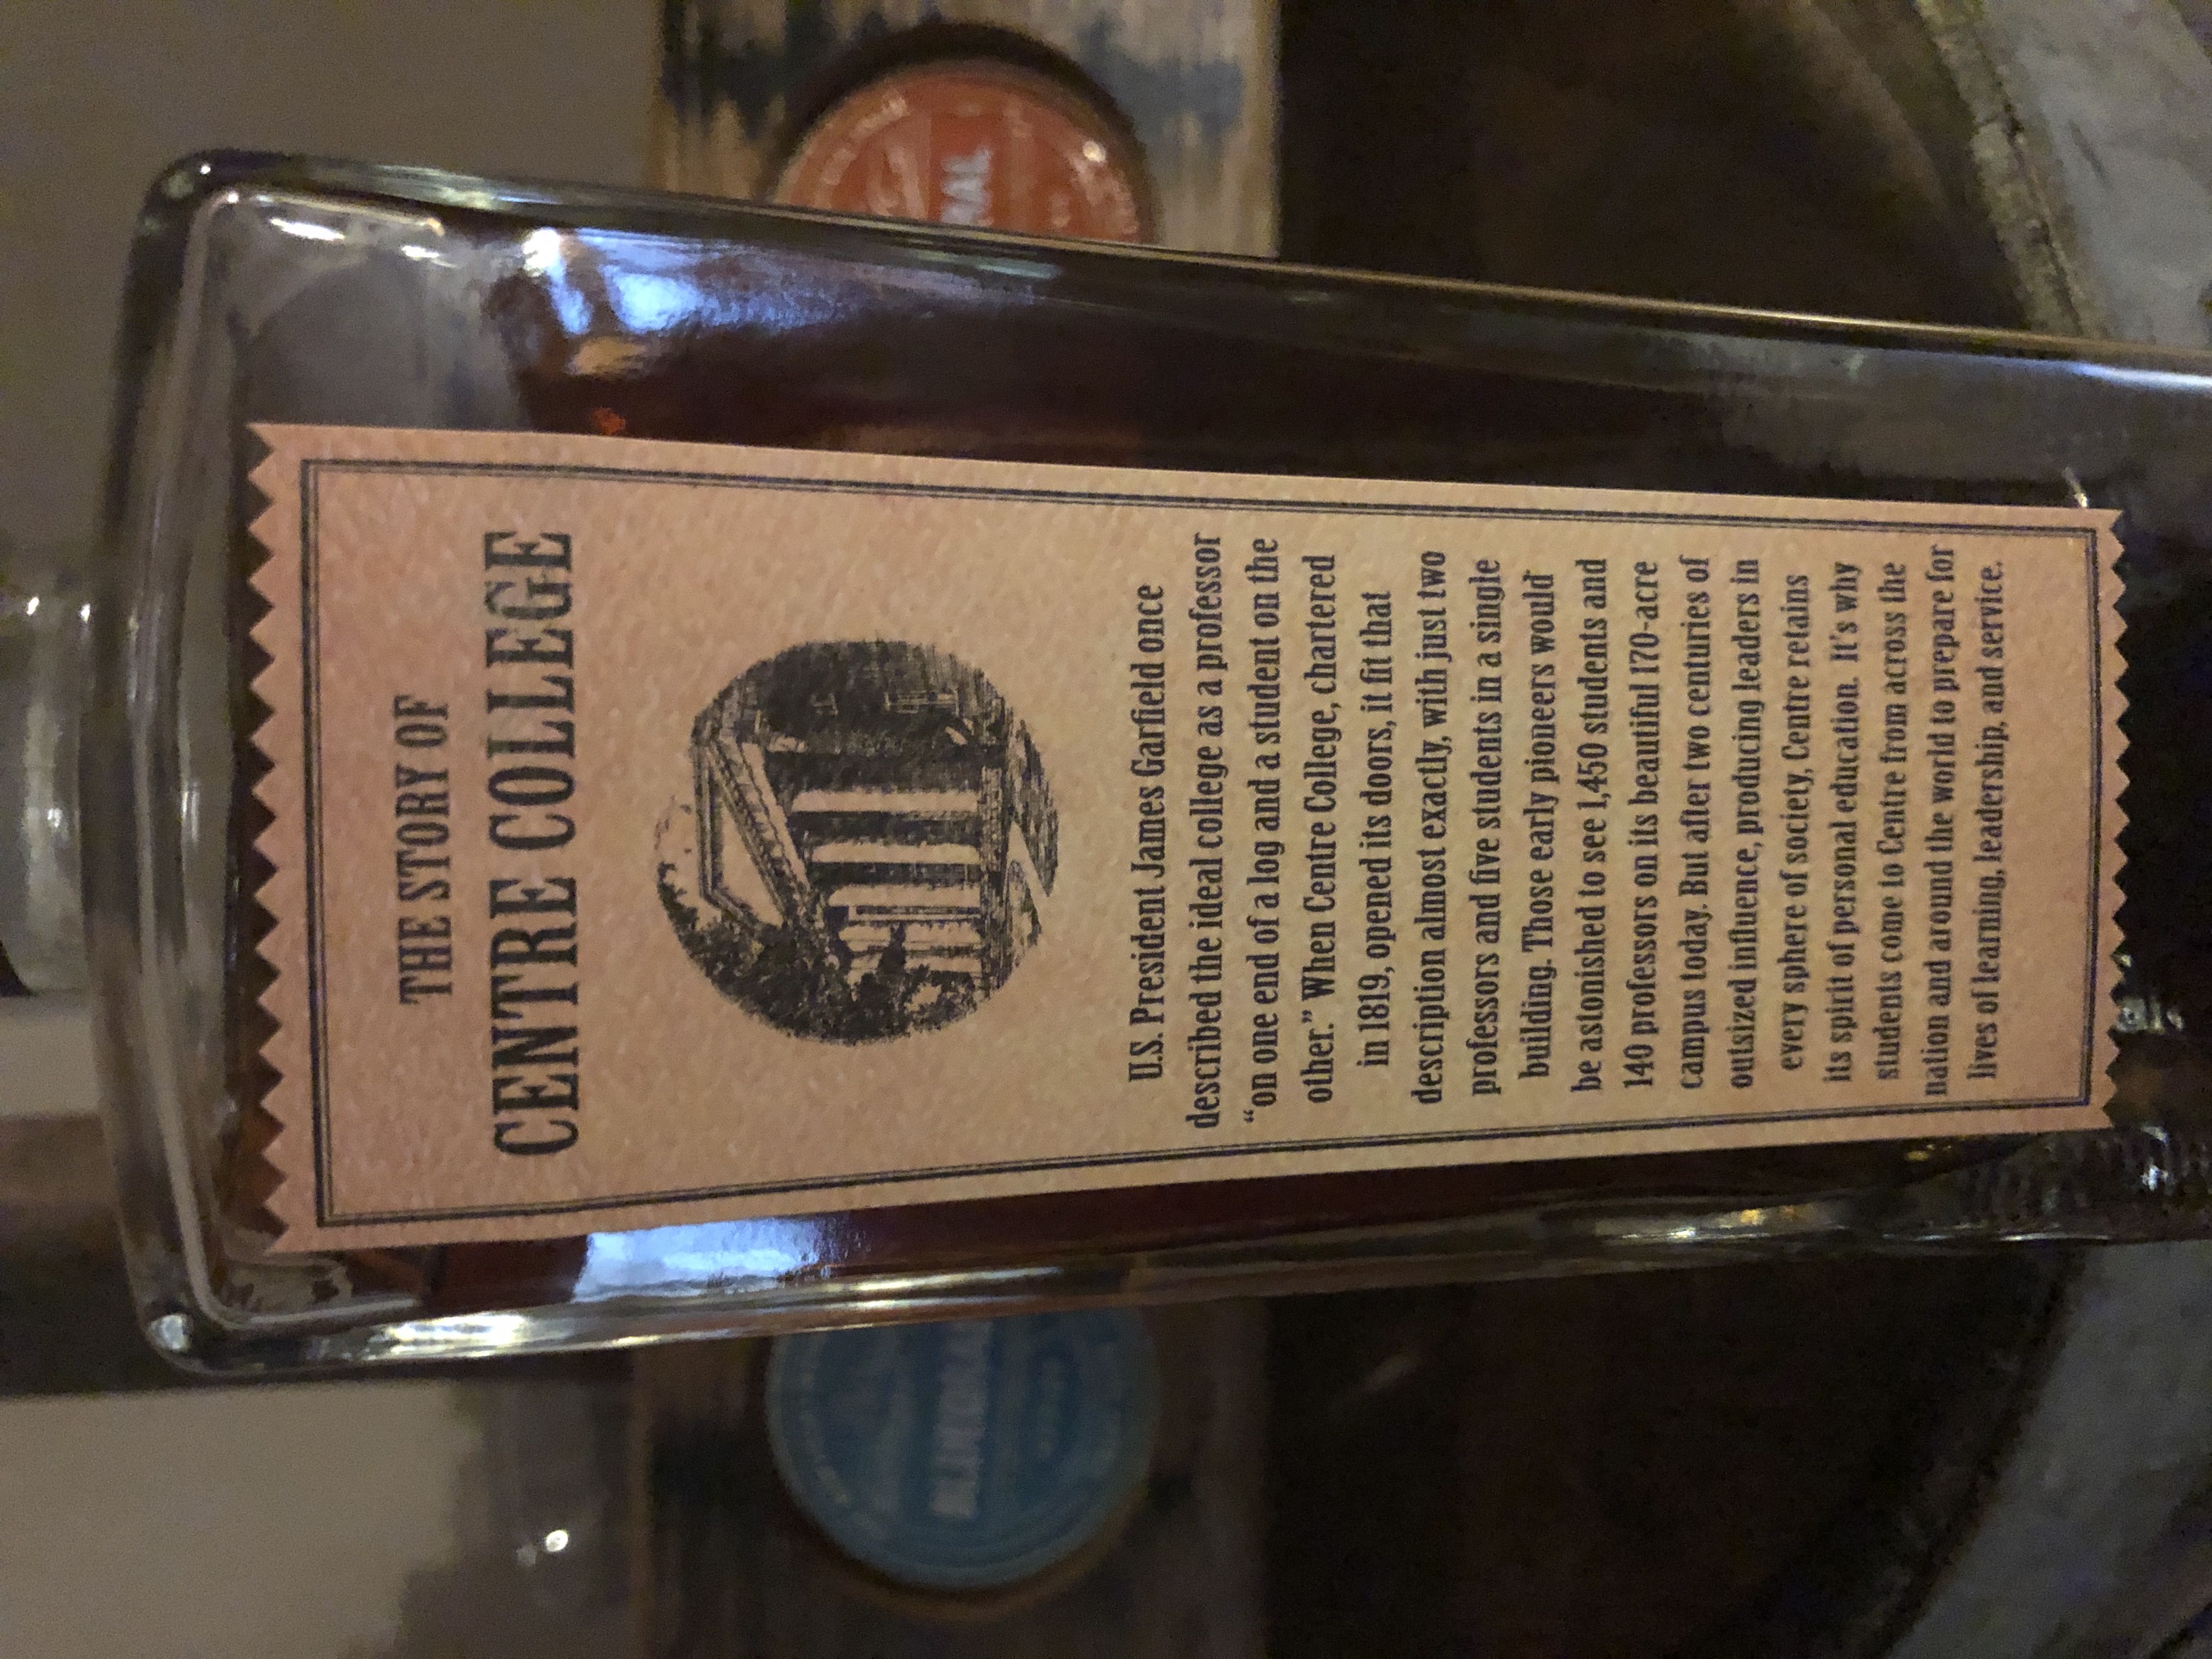 Wilderness Trail Single Barrel - Wilderness Trail Distillery (750 mL) alcohol collectible - Main Image 2